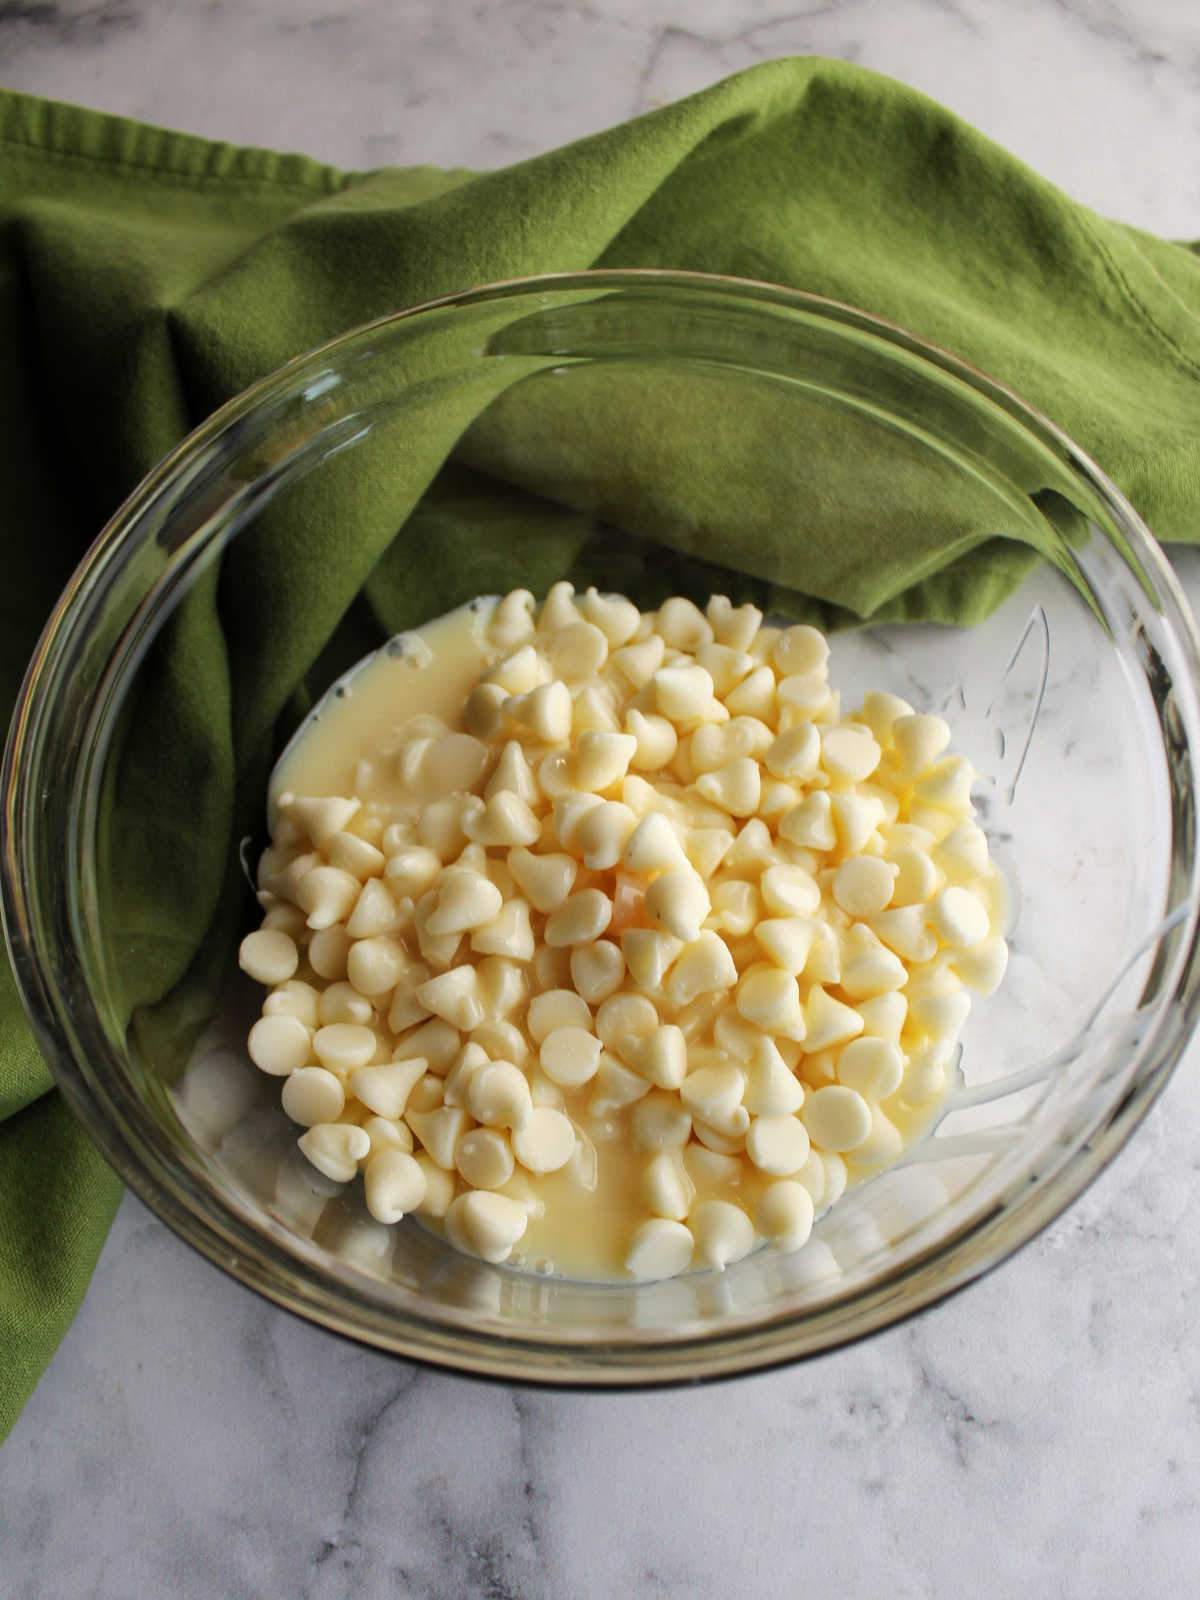 White chocolate chips and condensed milk in a small glass bowl.